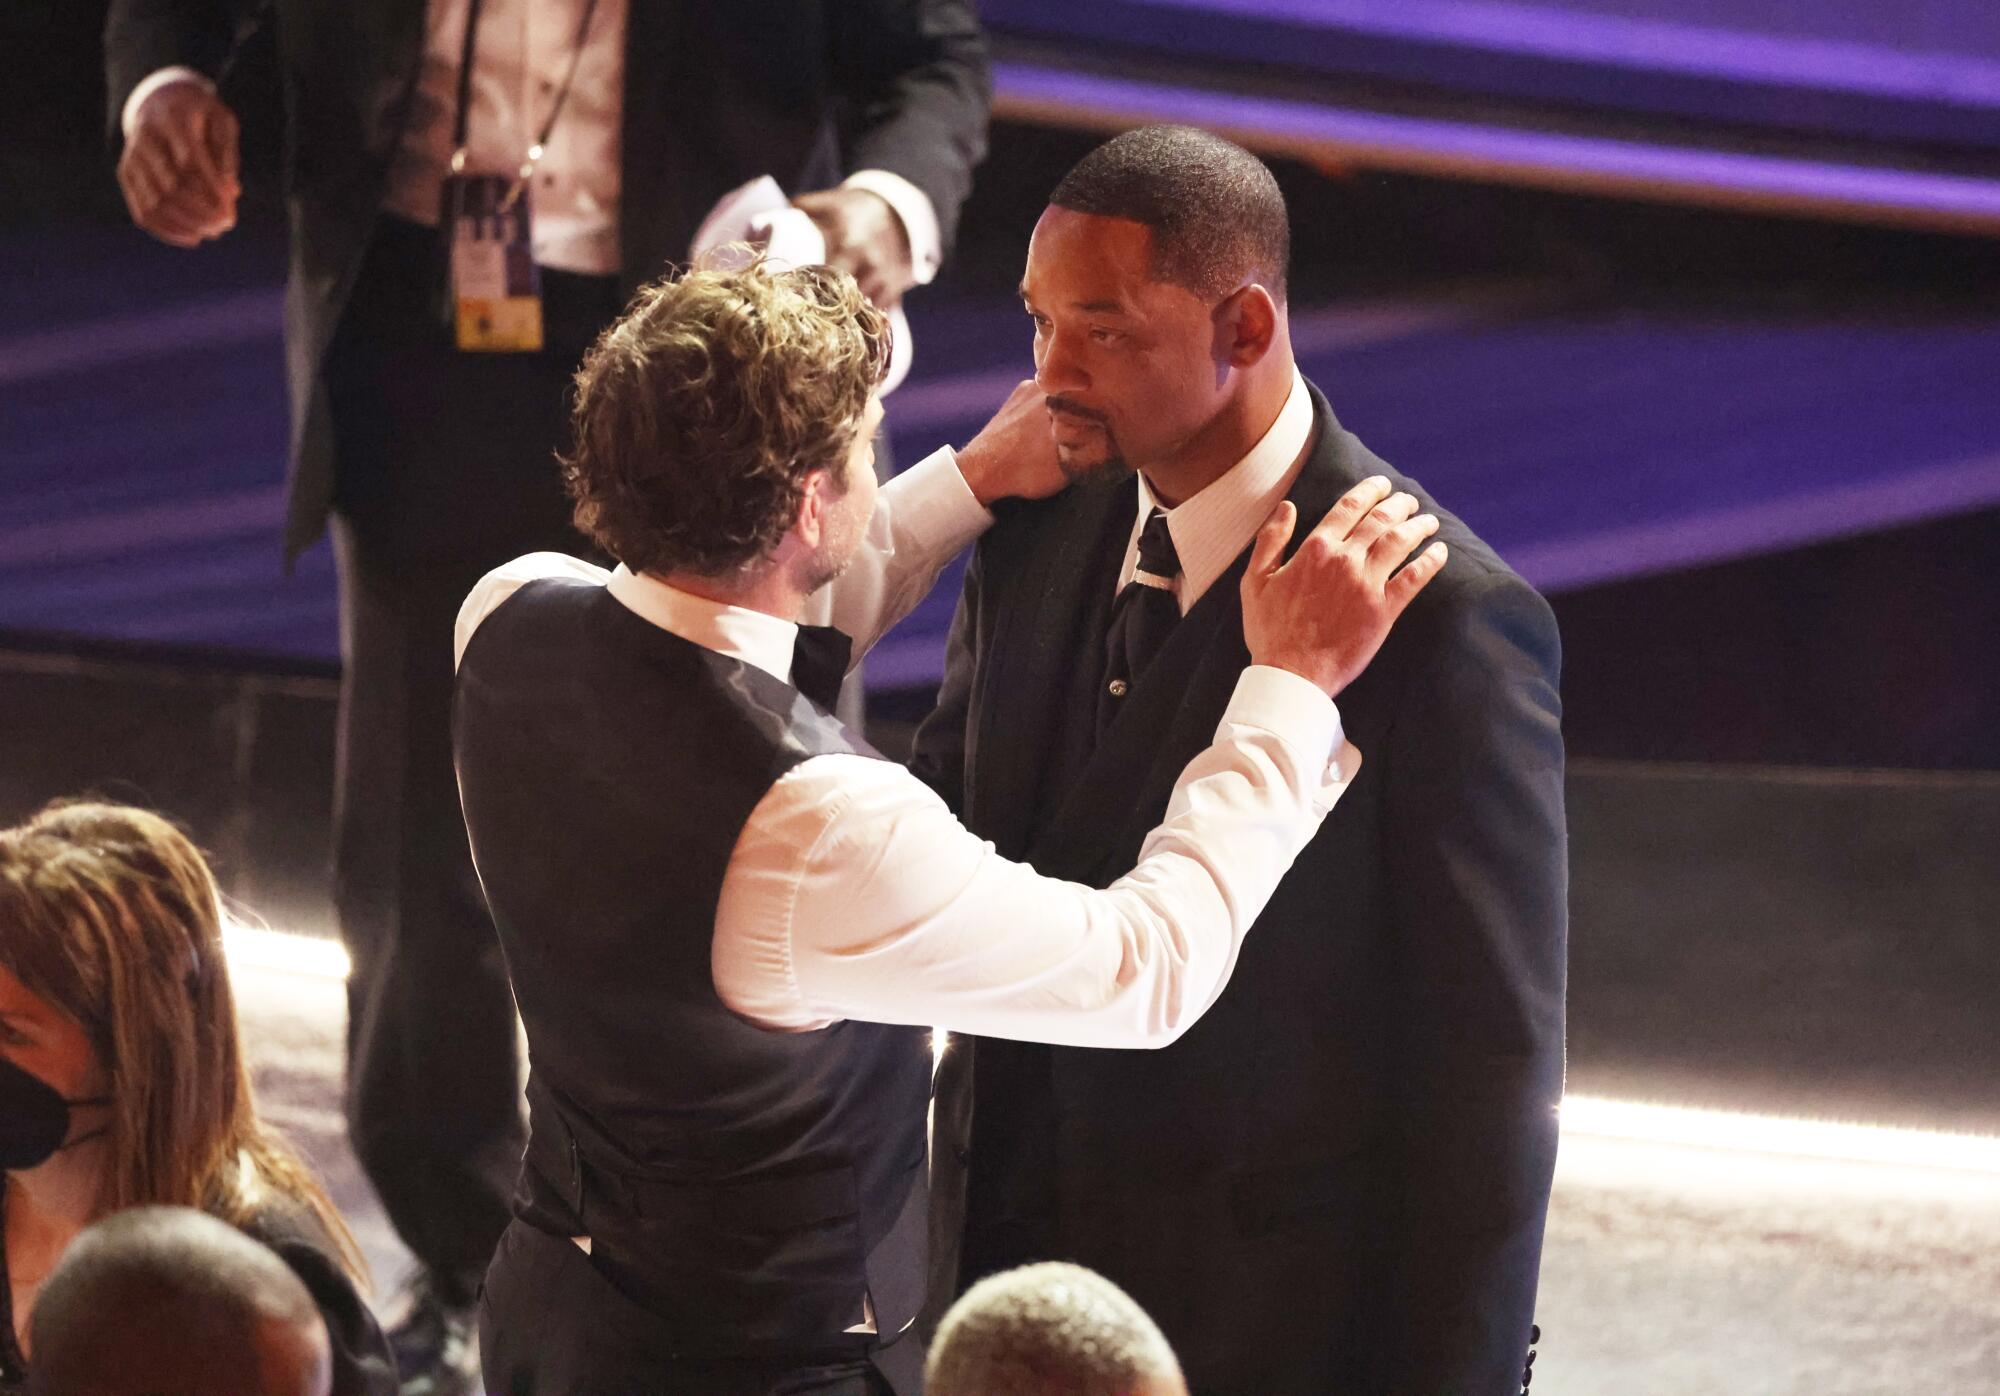 Bradley Cooper comforts Will Smith during the 94th Academy Awards at the Dolby Theatre.